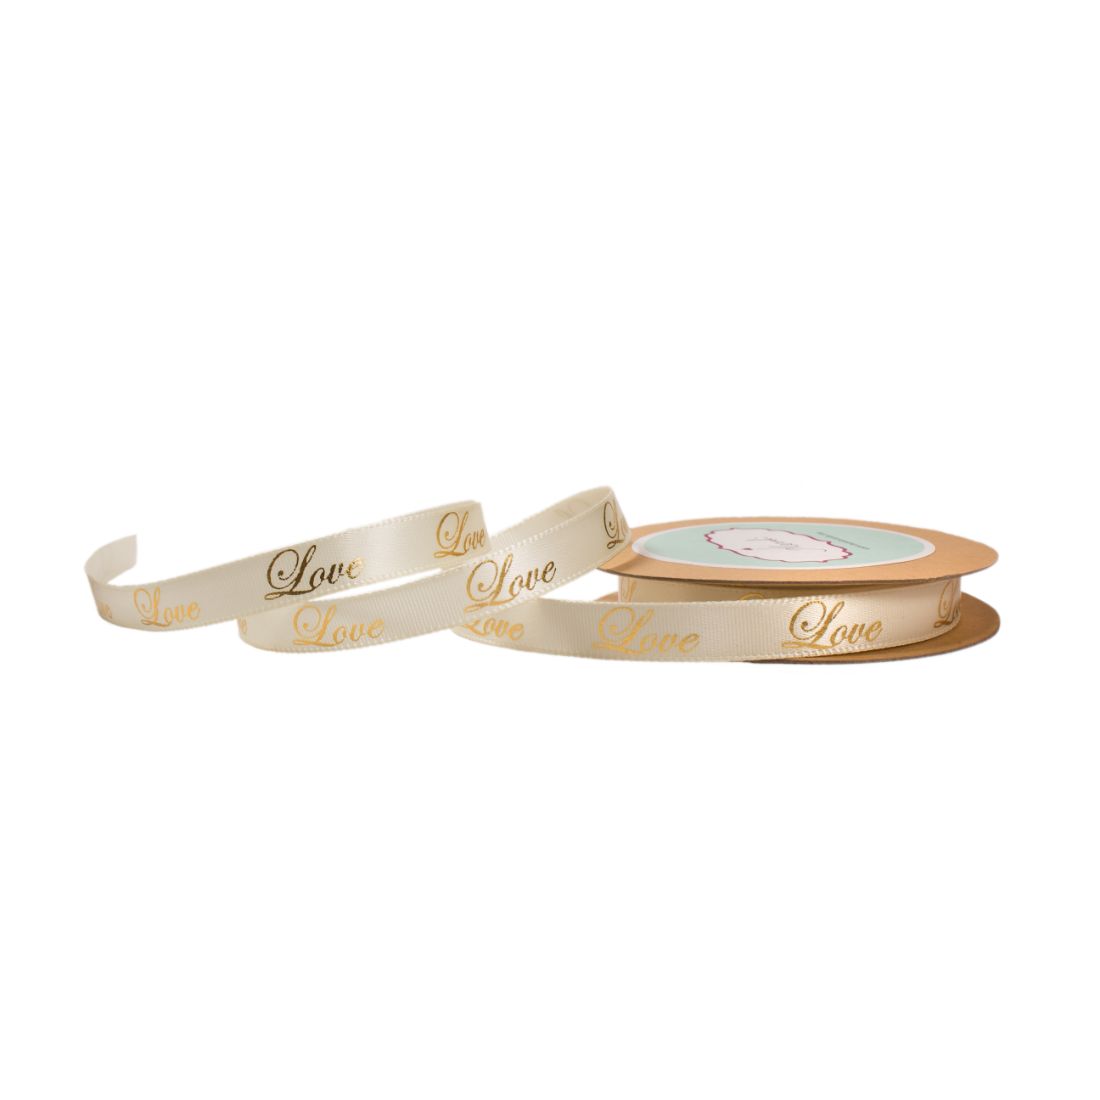 Off- white Satin Ribbon with Love printed in Gold